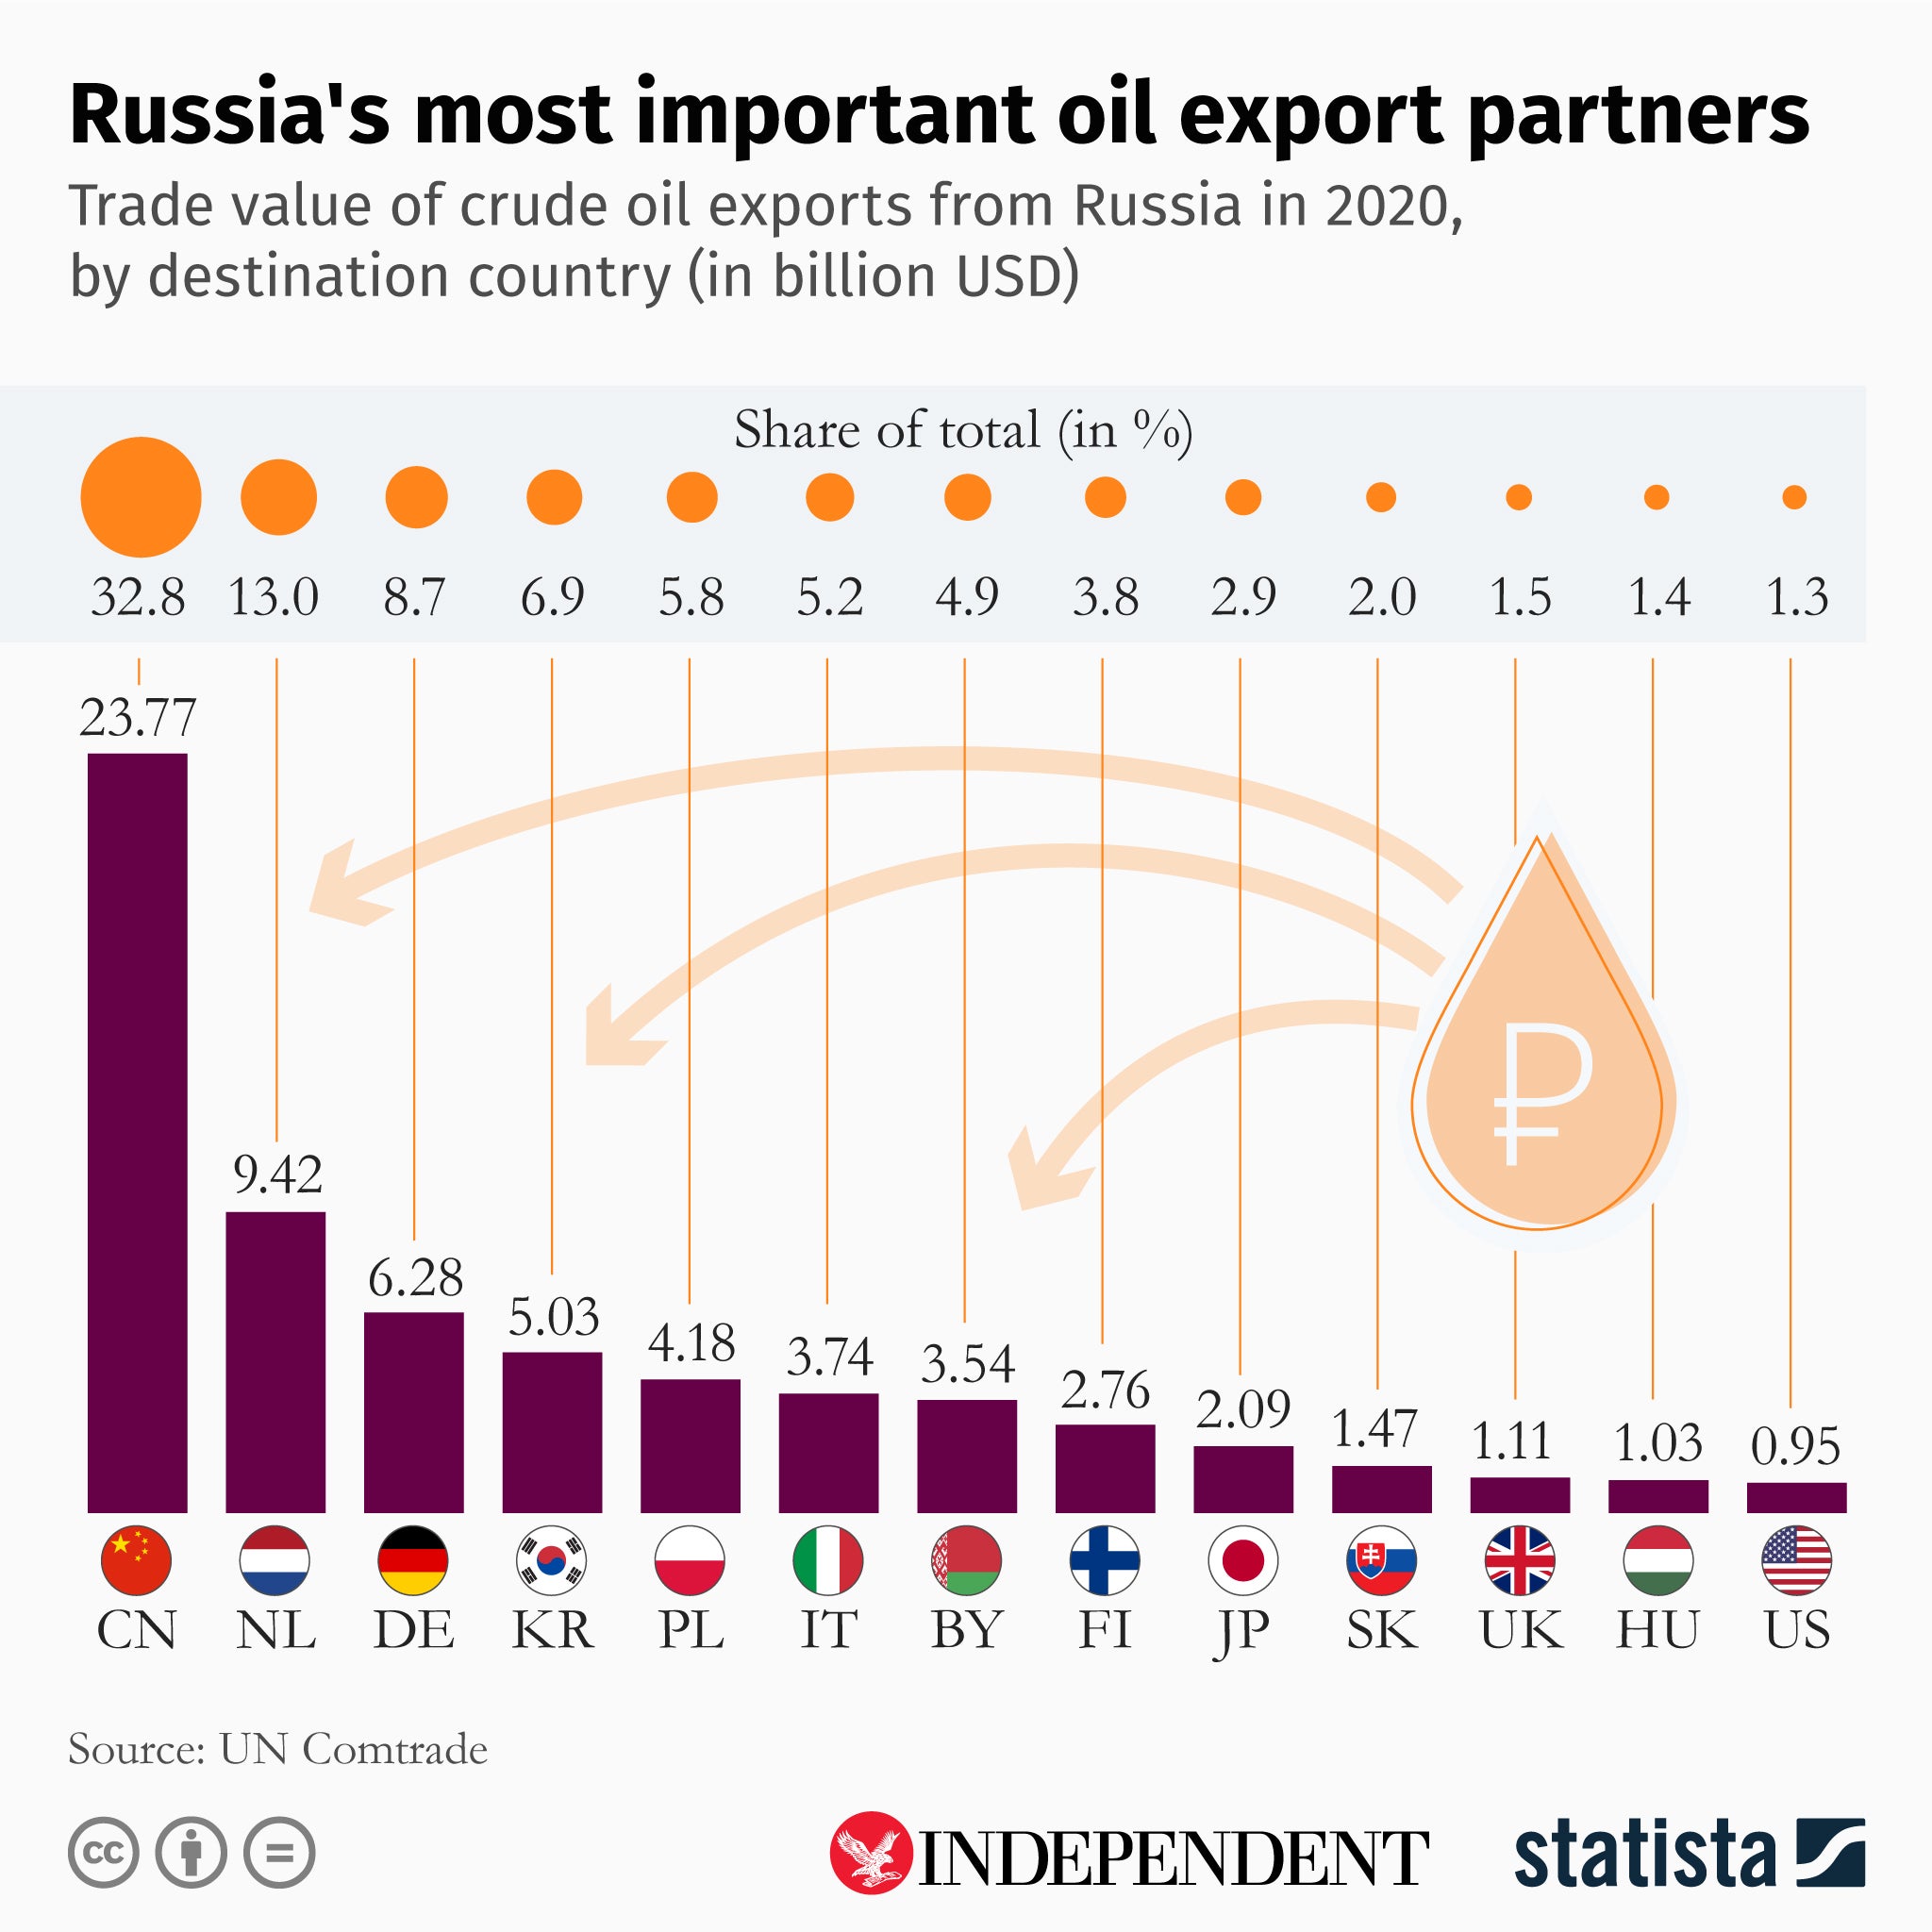 This infographic by Statista shows the countries which import the most Russian oil